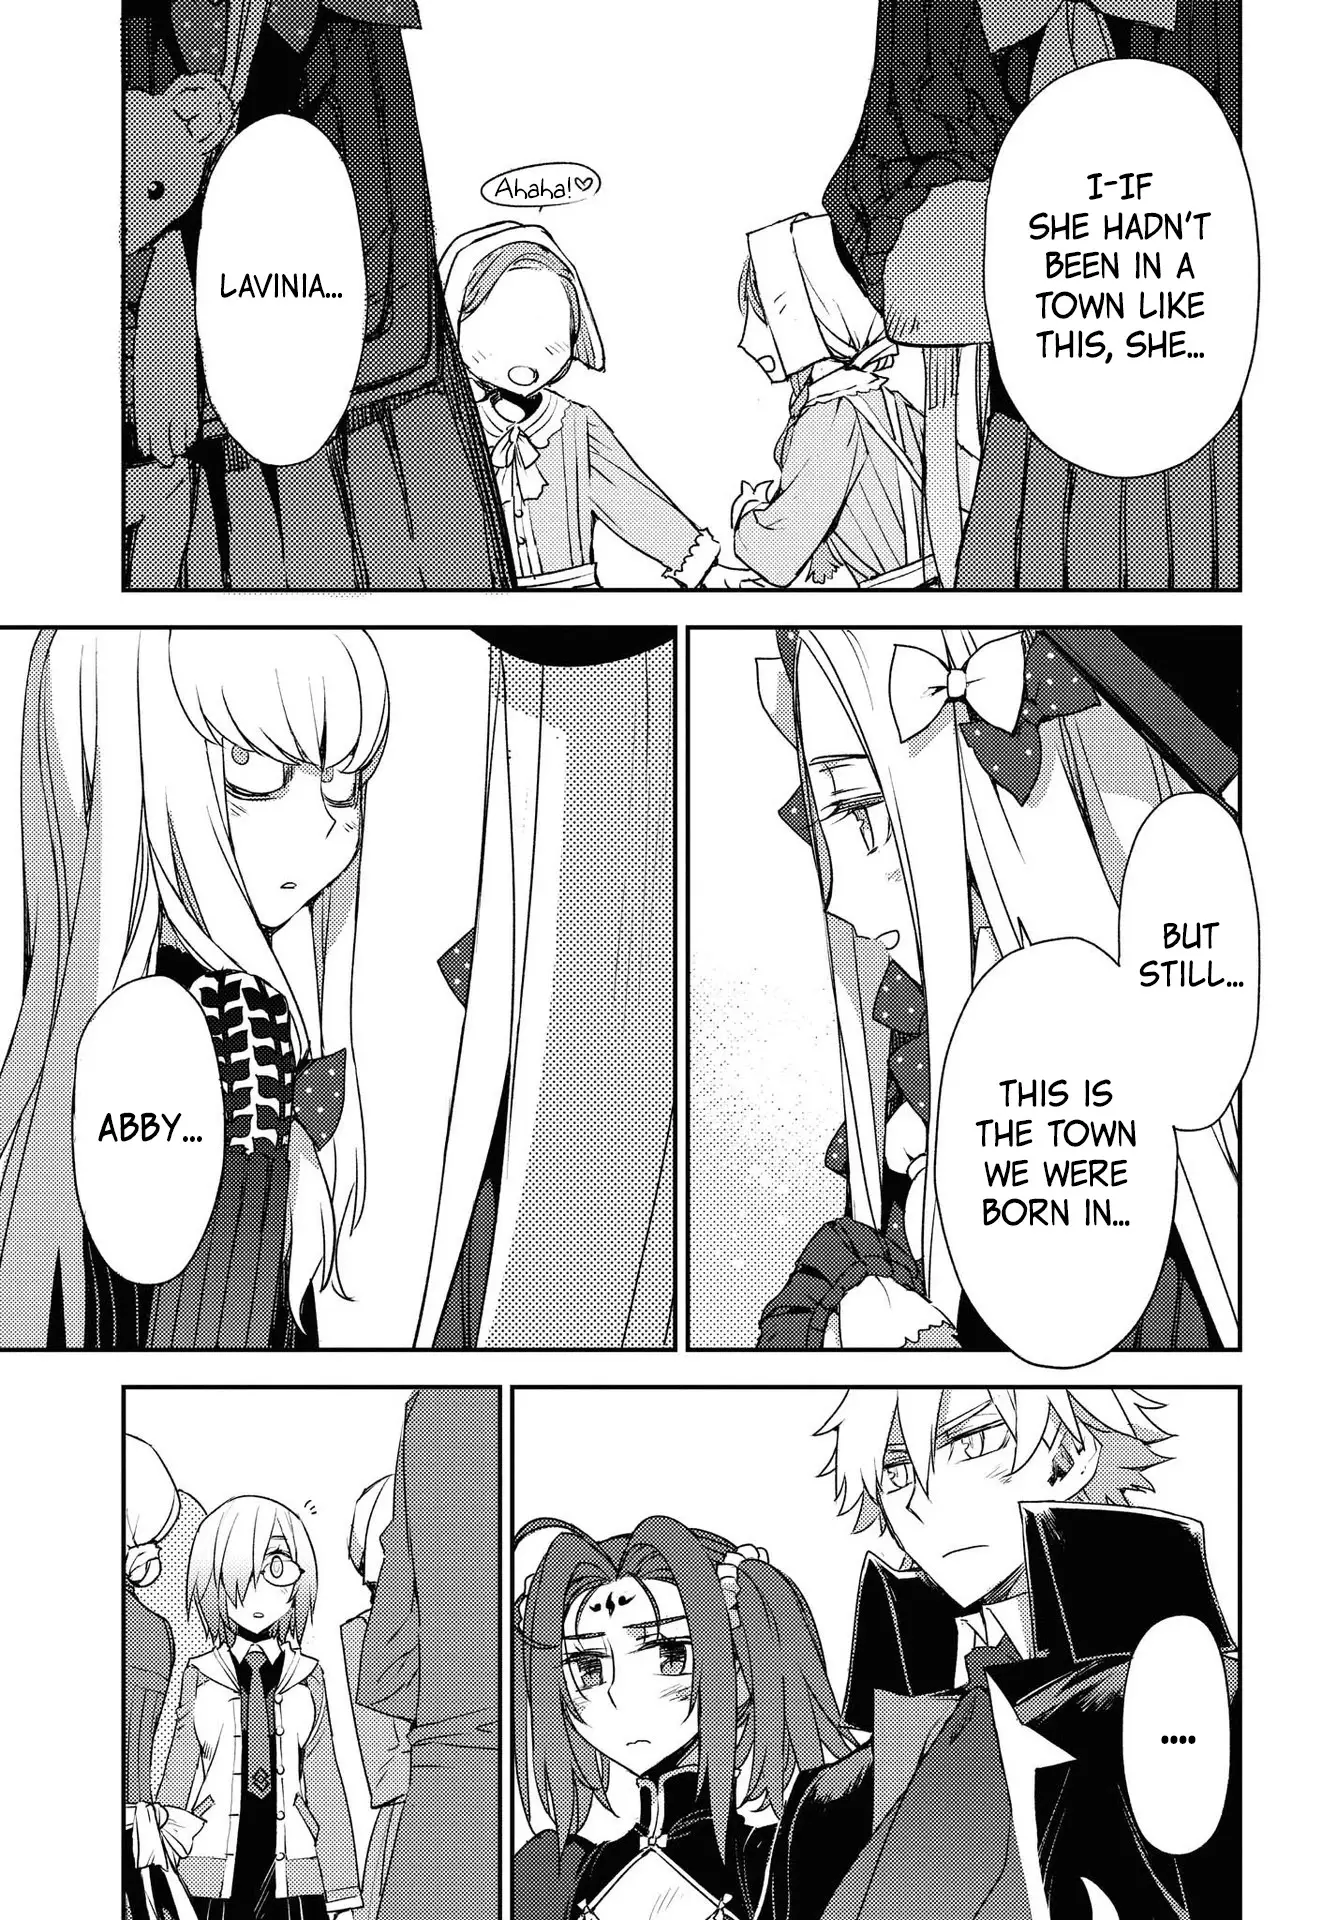 Fate/grand Order: Epic Of Remnant - Subspecies Singularity Iv: Taboo Advent Salem: Salem Of Heresy - 21 page 17-4da67c8e